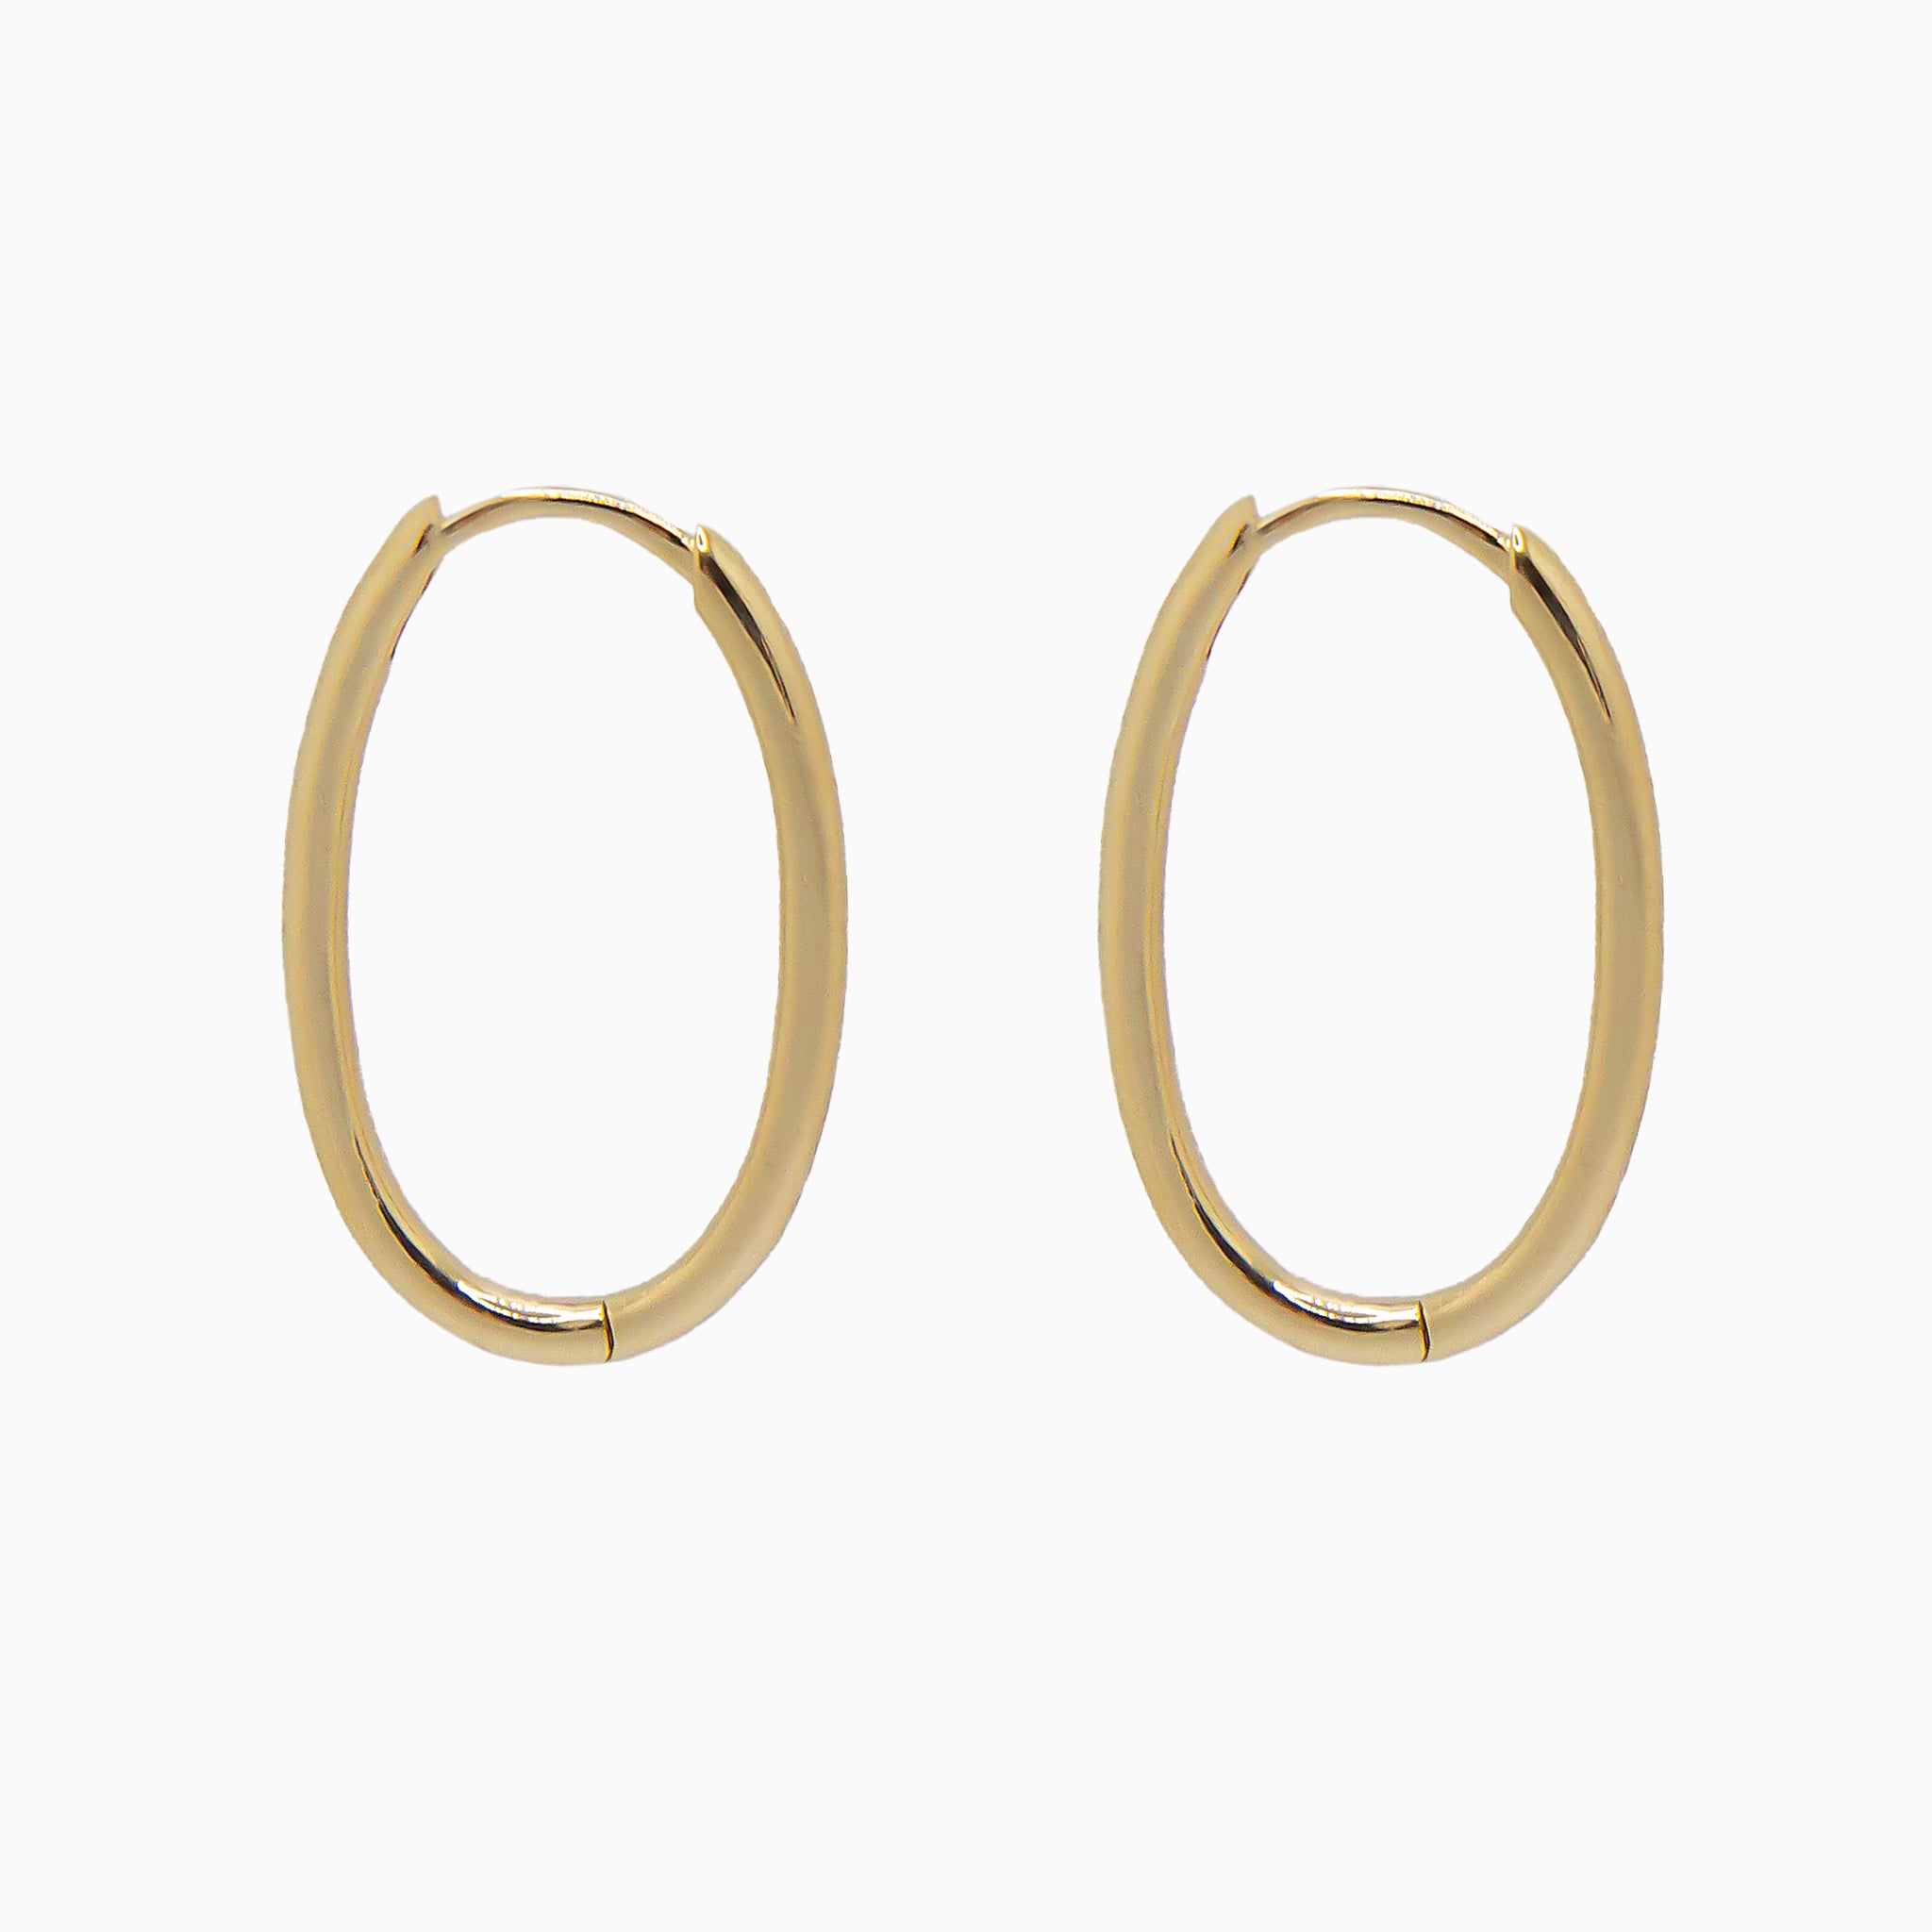 14k Yellow Gold 21mm x 14mm Hinged Everyday Oval Hoop Earrings, Side View